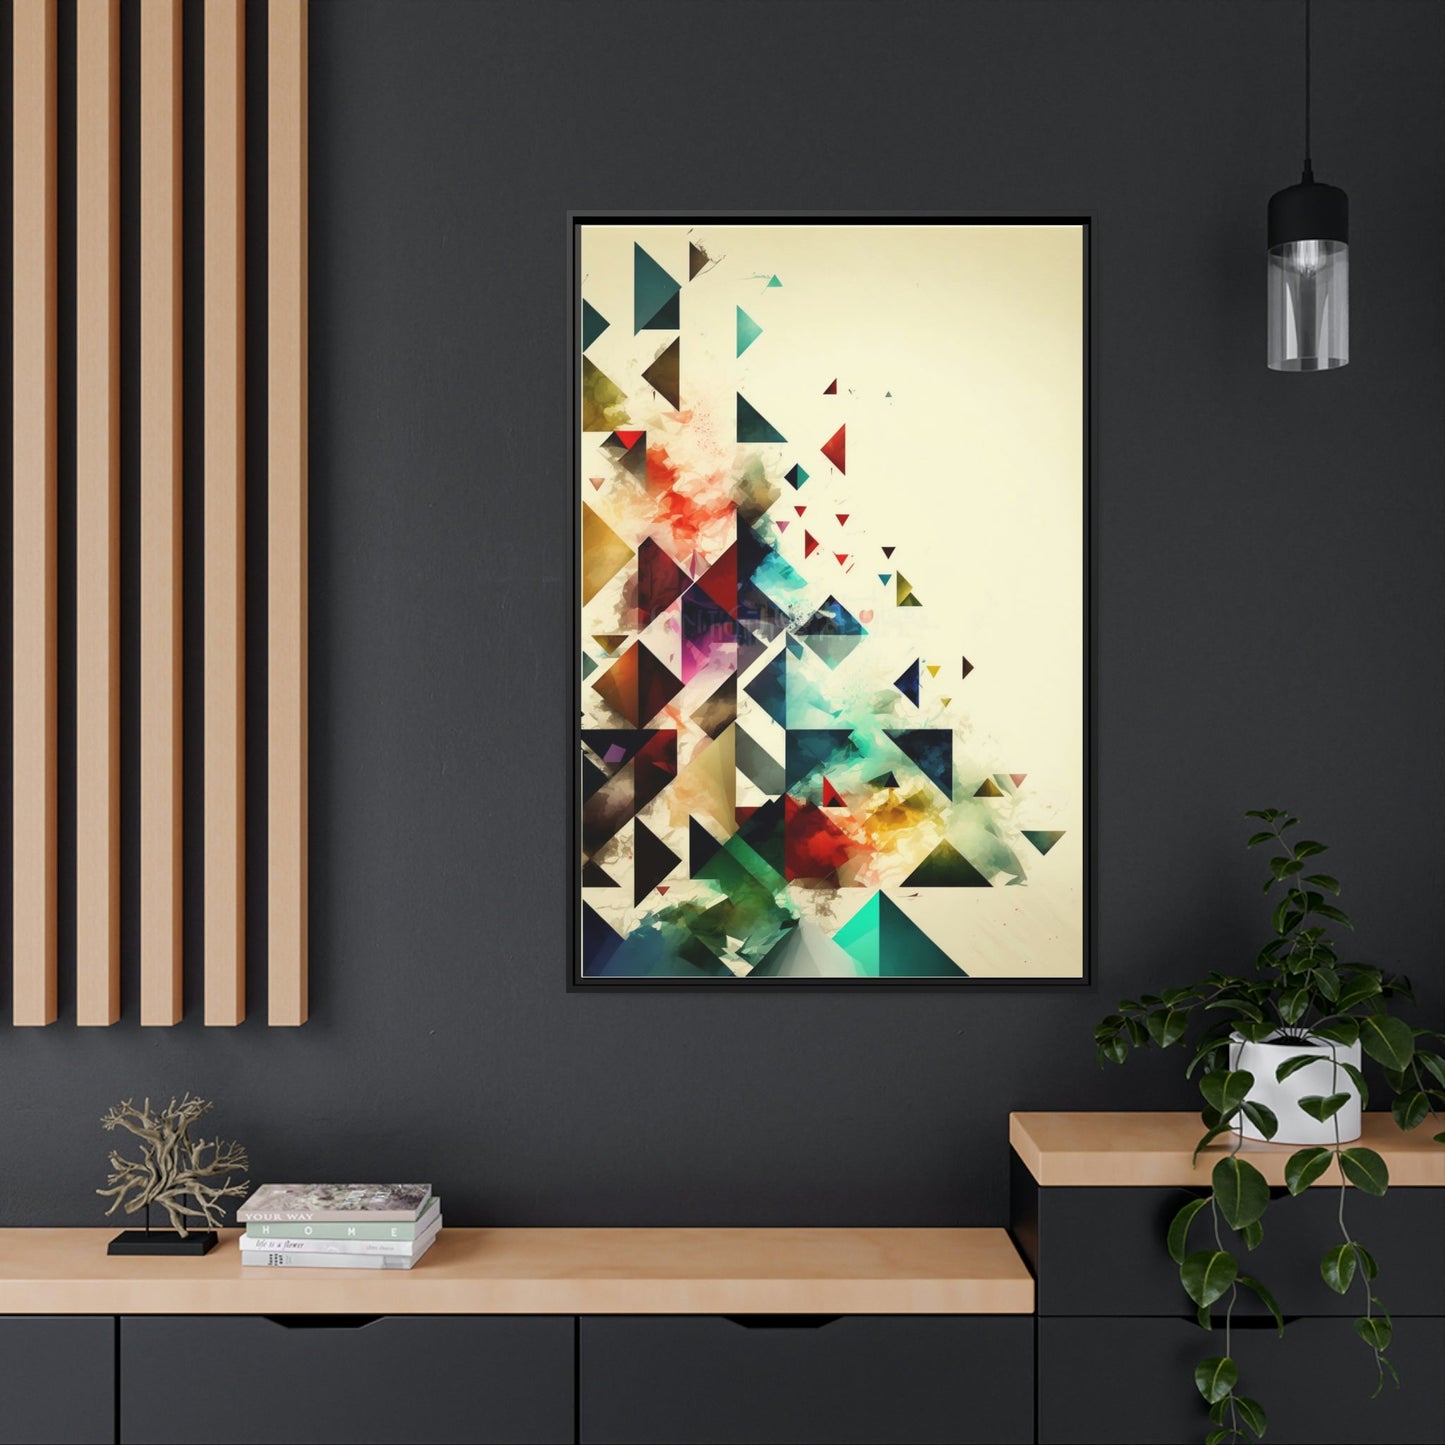 Illusions of Reality: Canvas & Poster Print of Geometric Abstraction